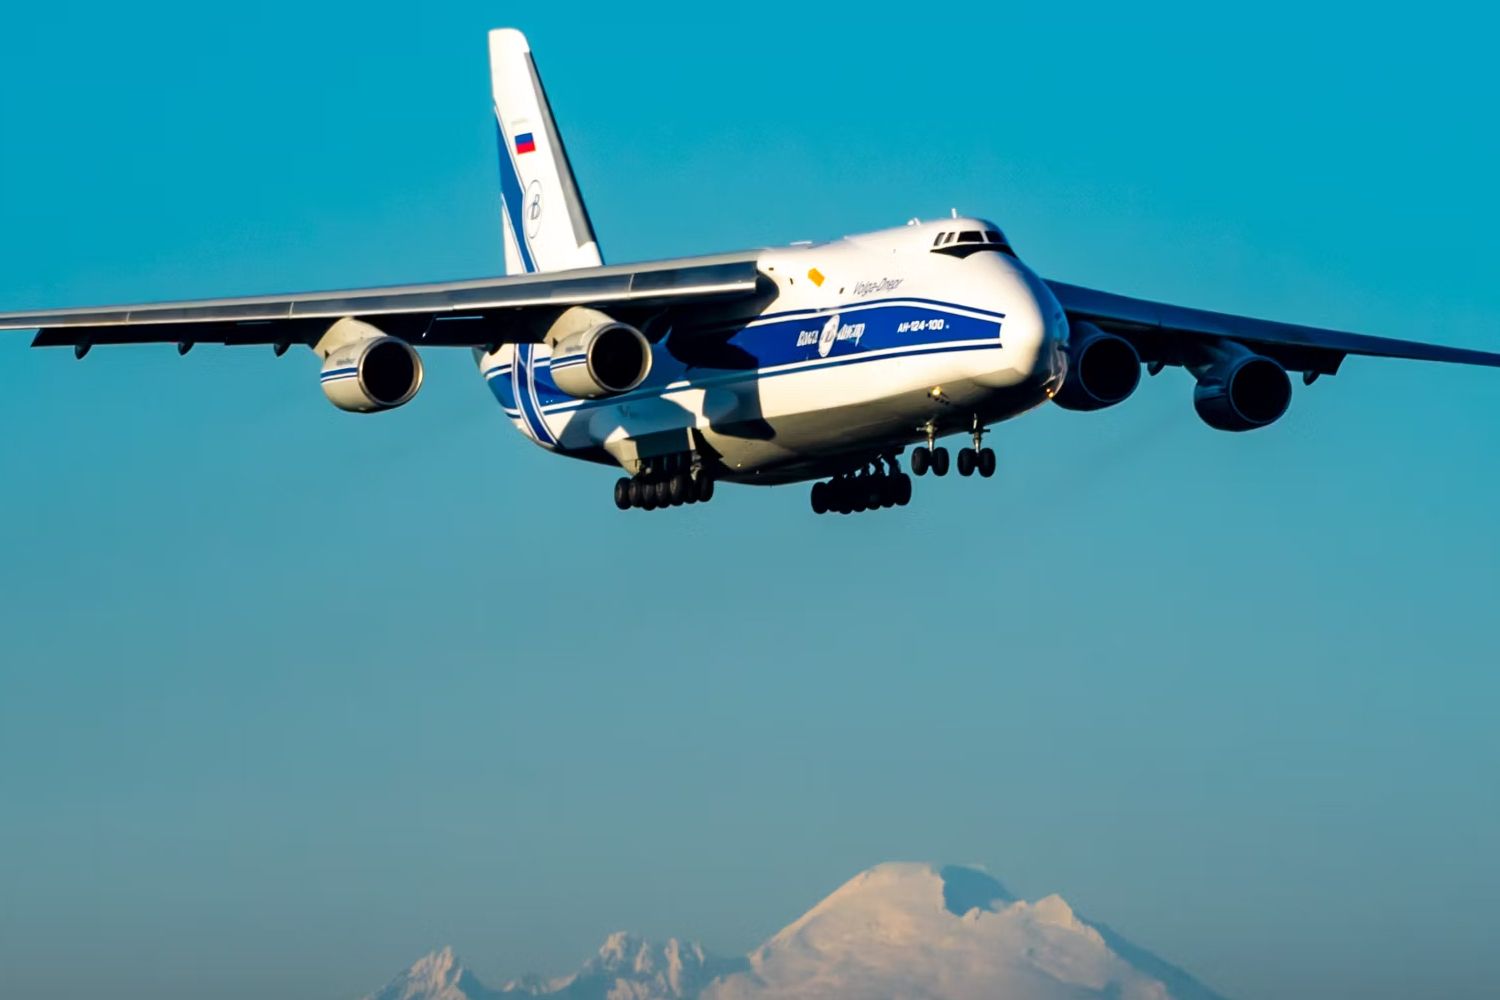 2mp_of_an-124-on-final-with-mt-baker-in-background_01-1